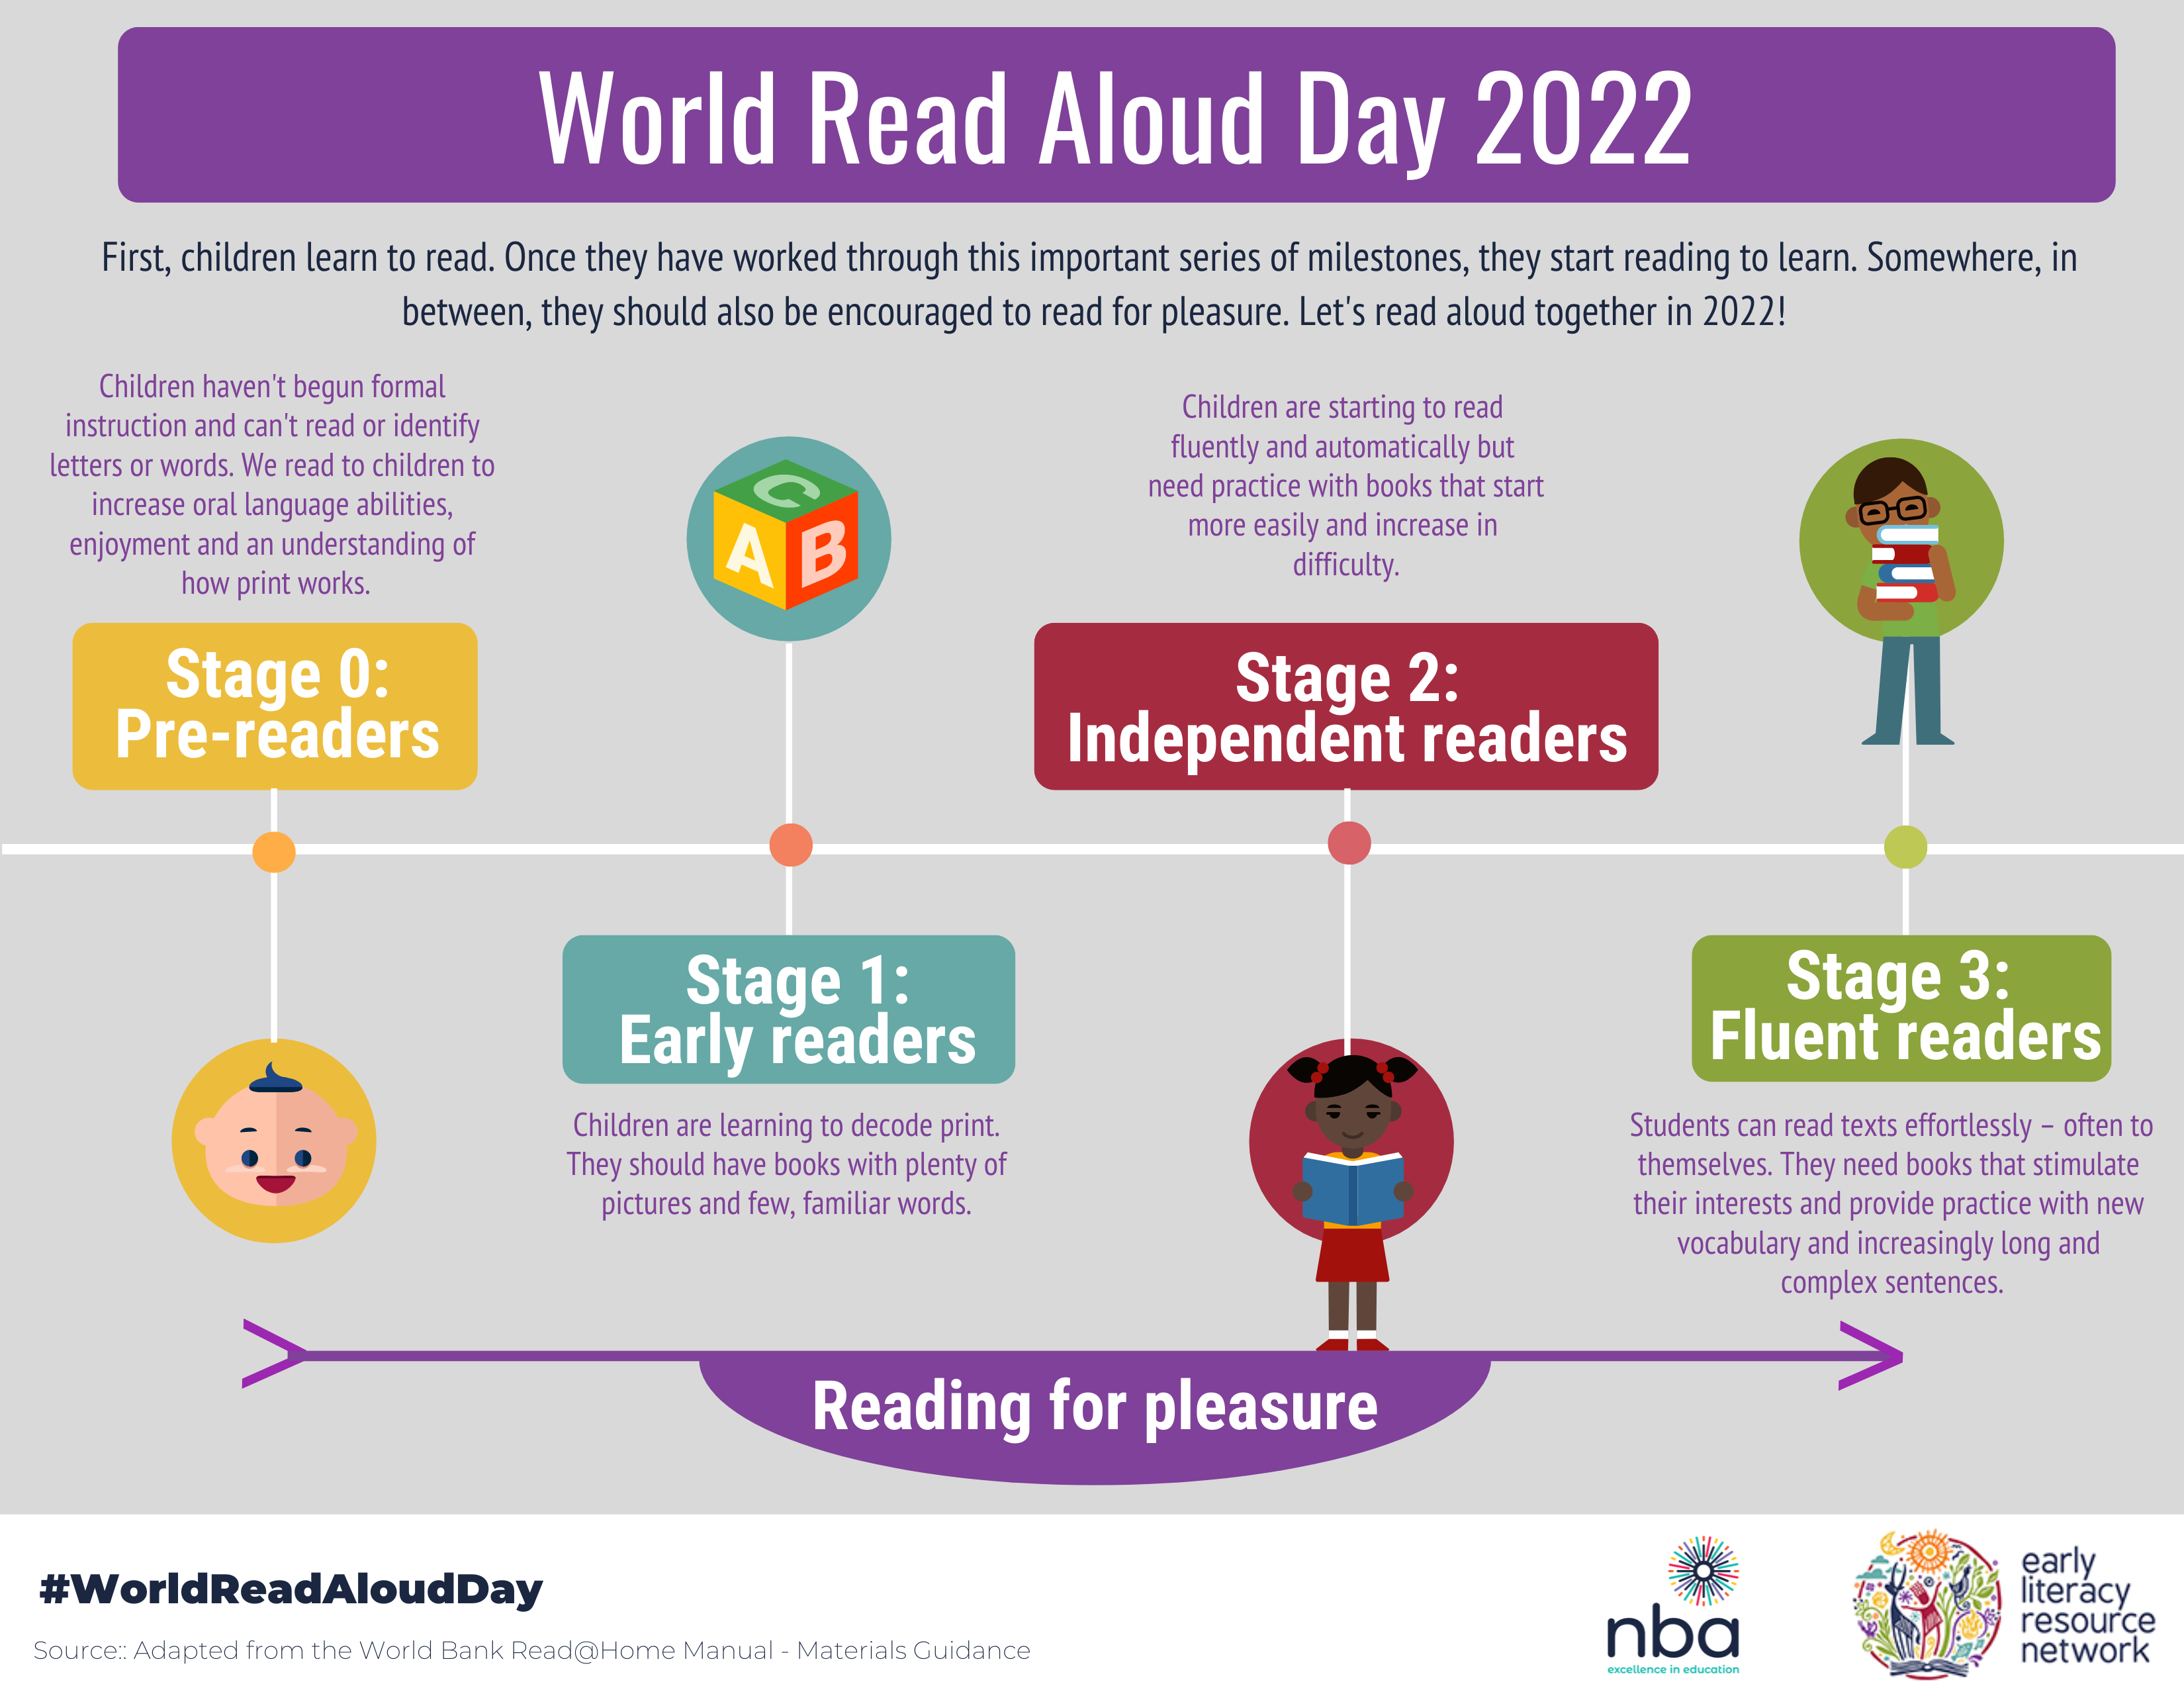 An infographic that describes the different stages of reading for children learning to read.